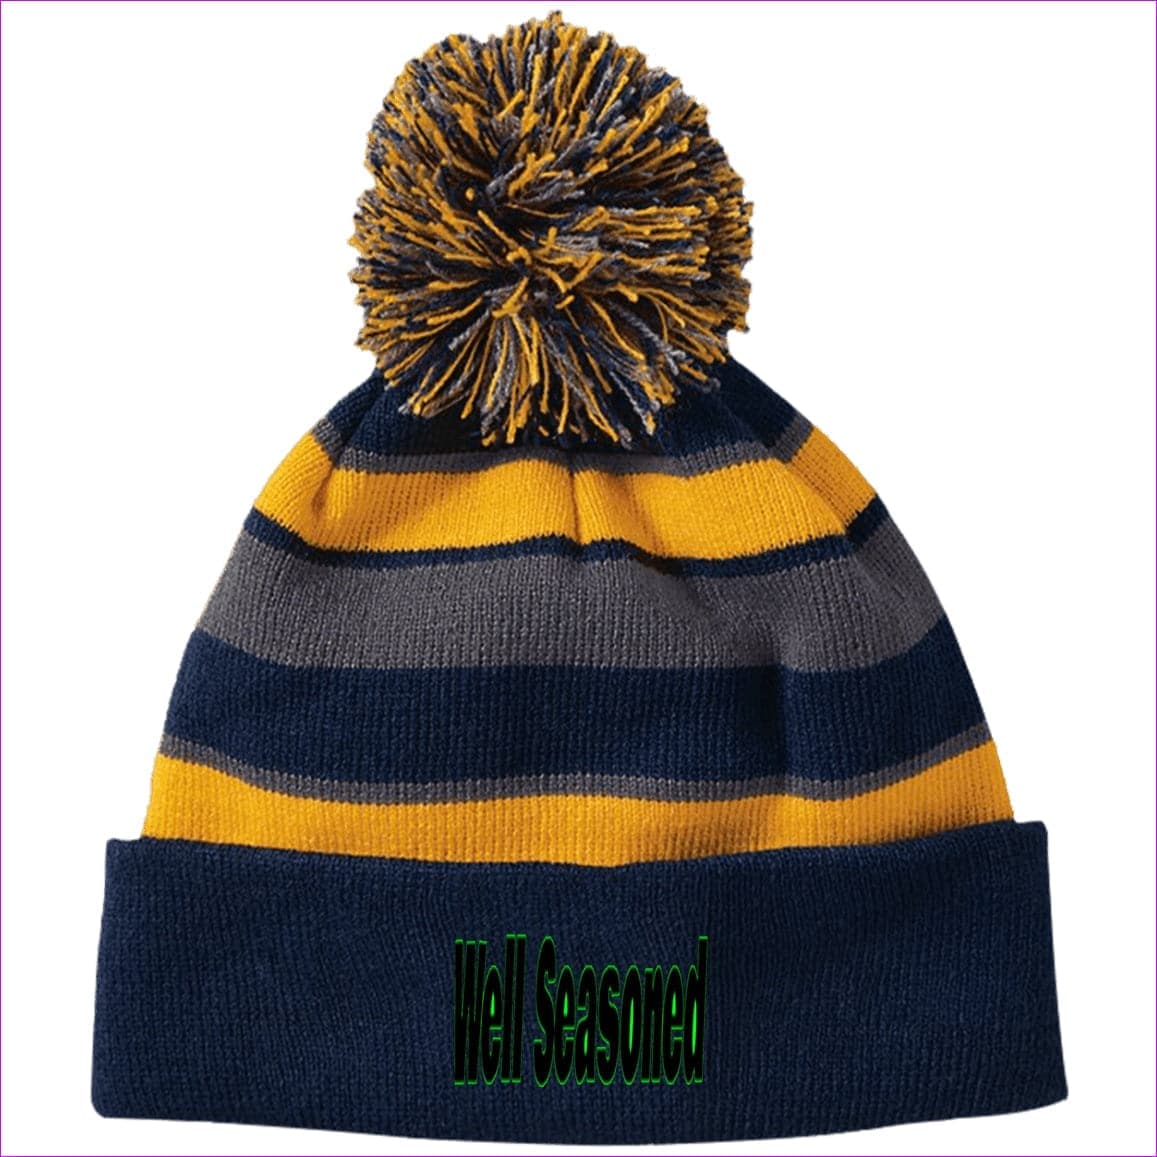 Navy/Light Gold One Size Well Seasoned Embroidered Holloway Striped Beanie with Pom - Hats at TFC&H Co.